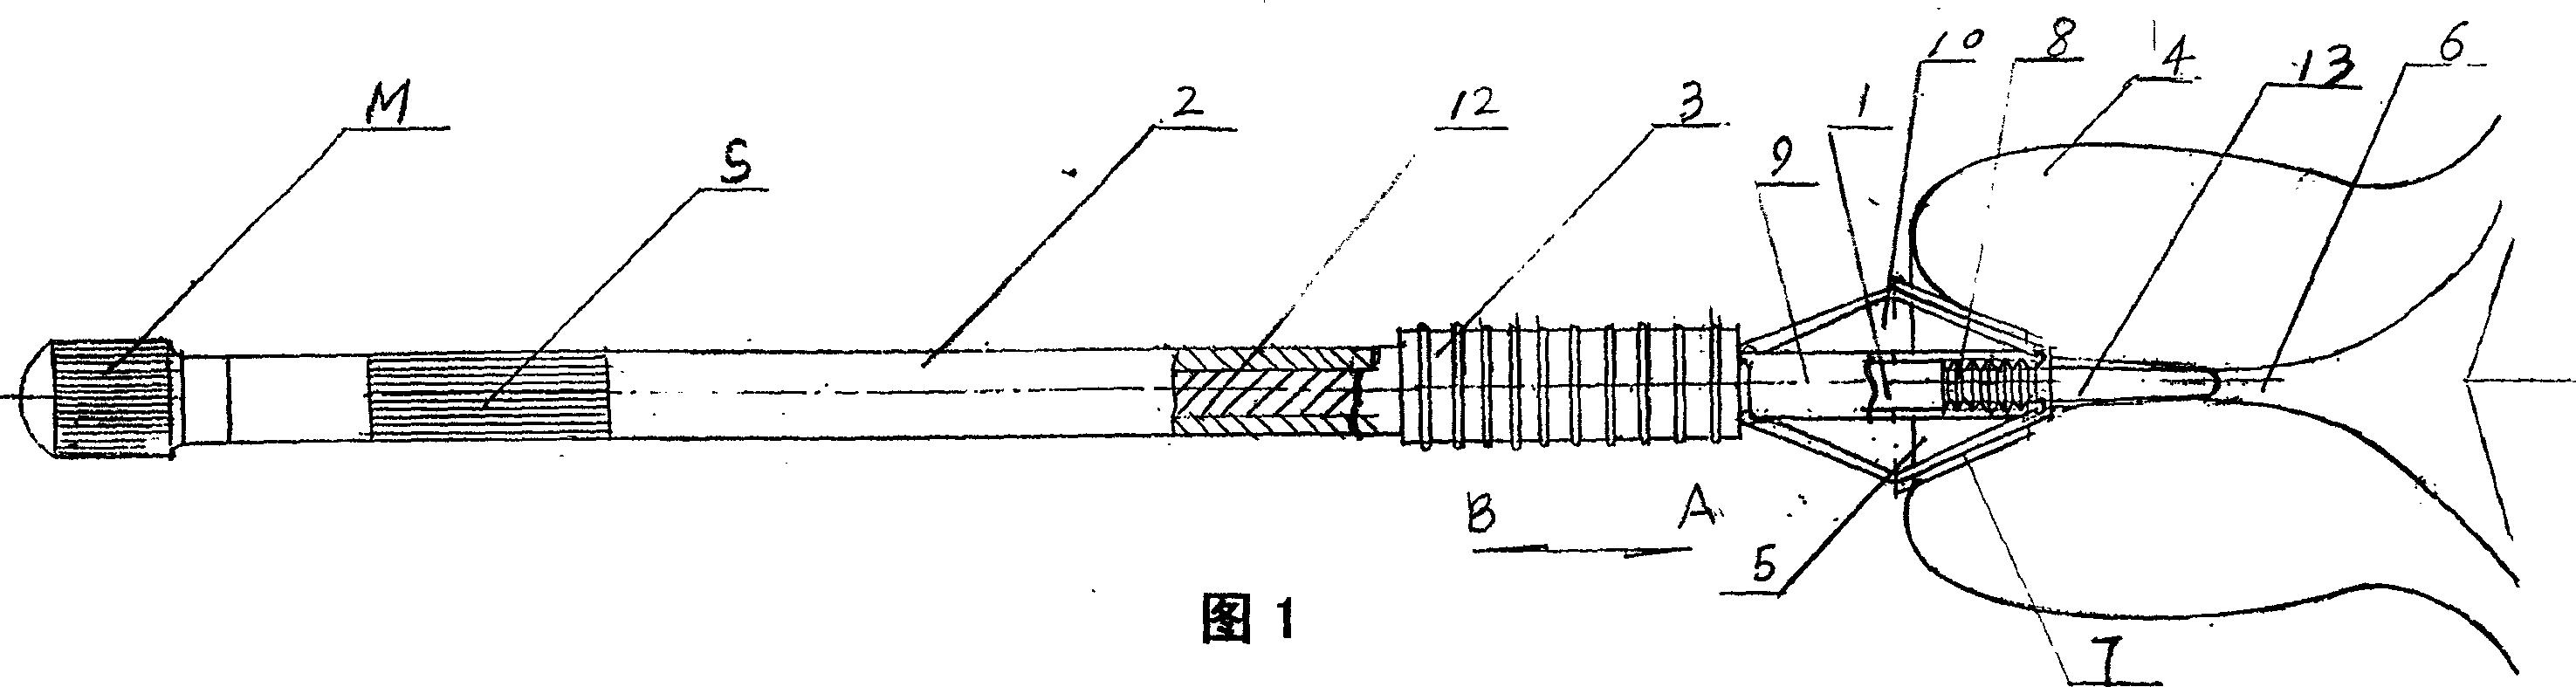 Uterine neck epithelial cell collecting equipment